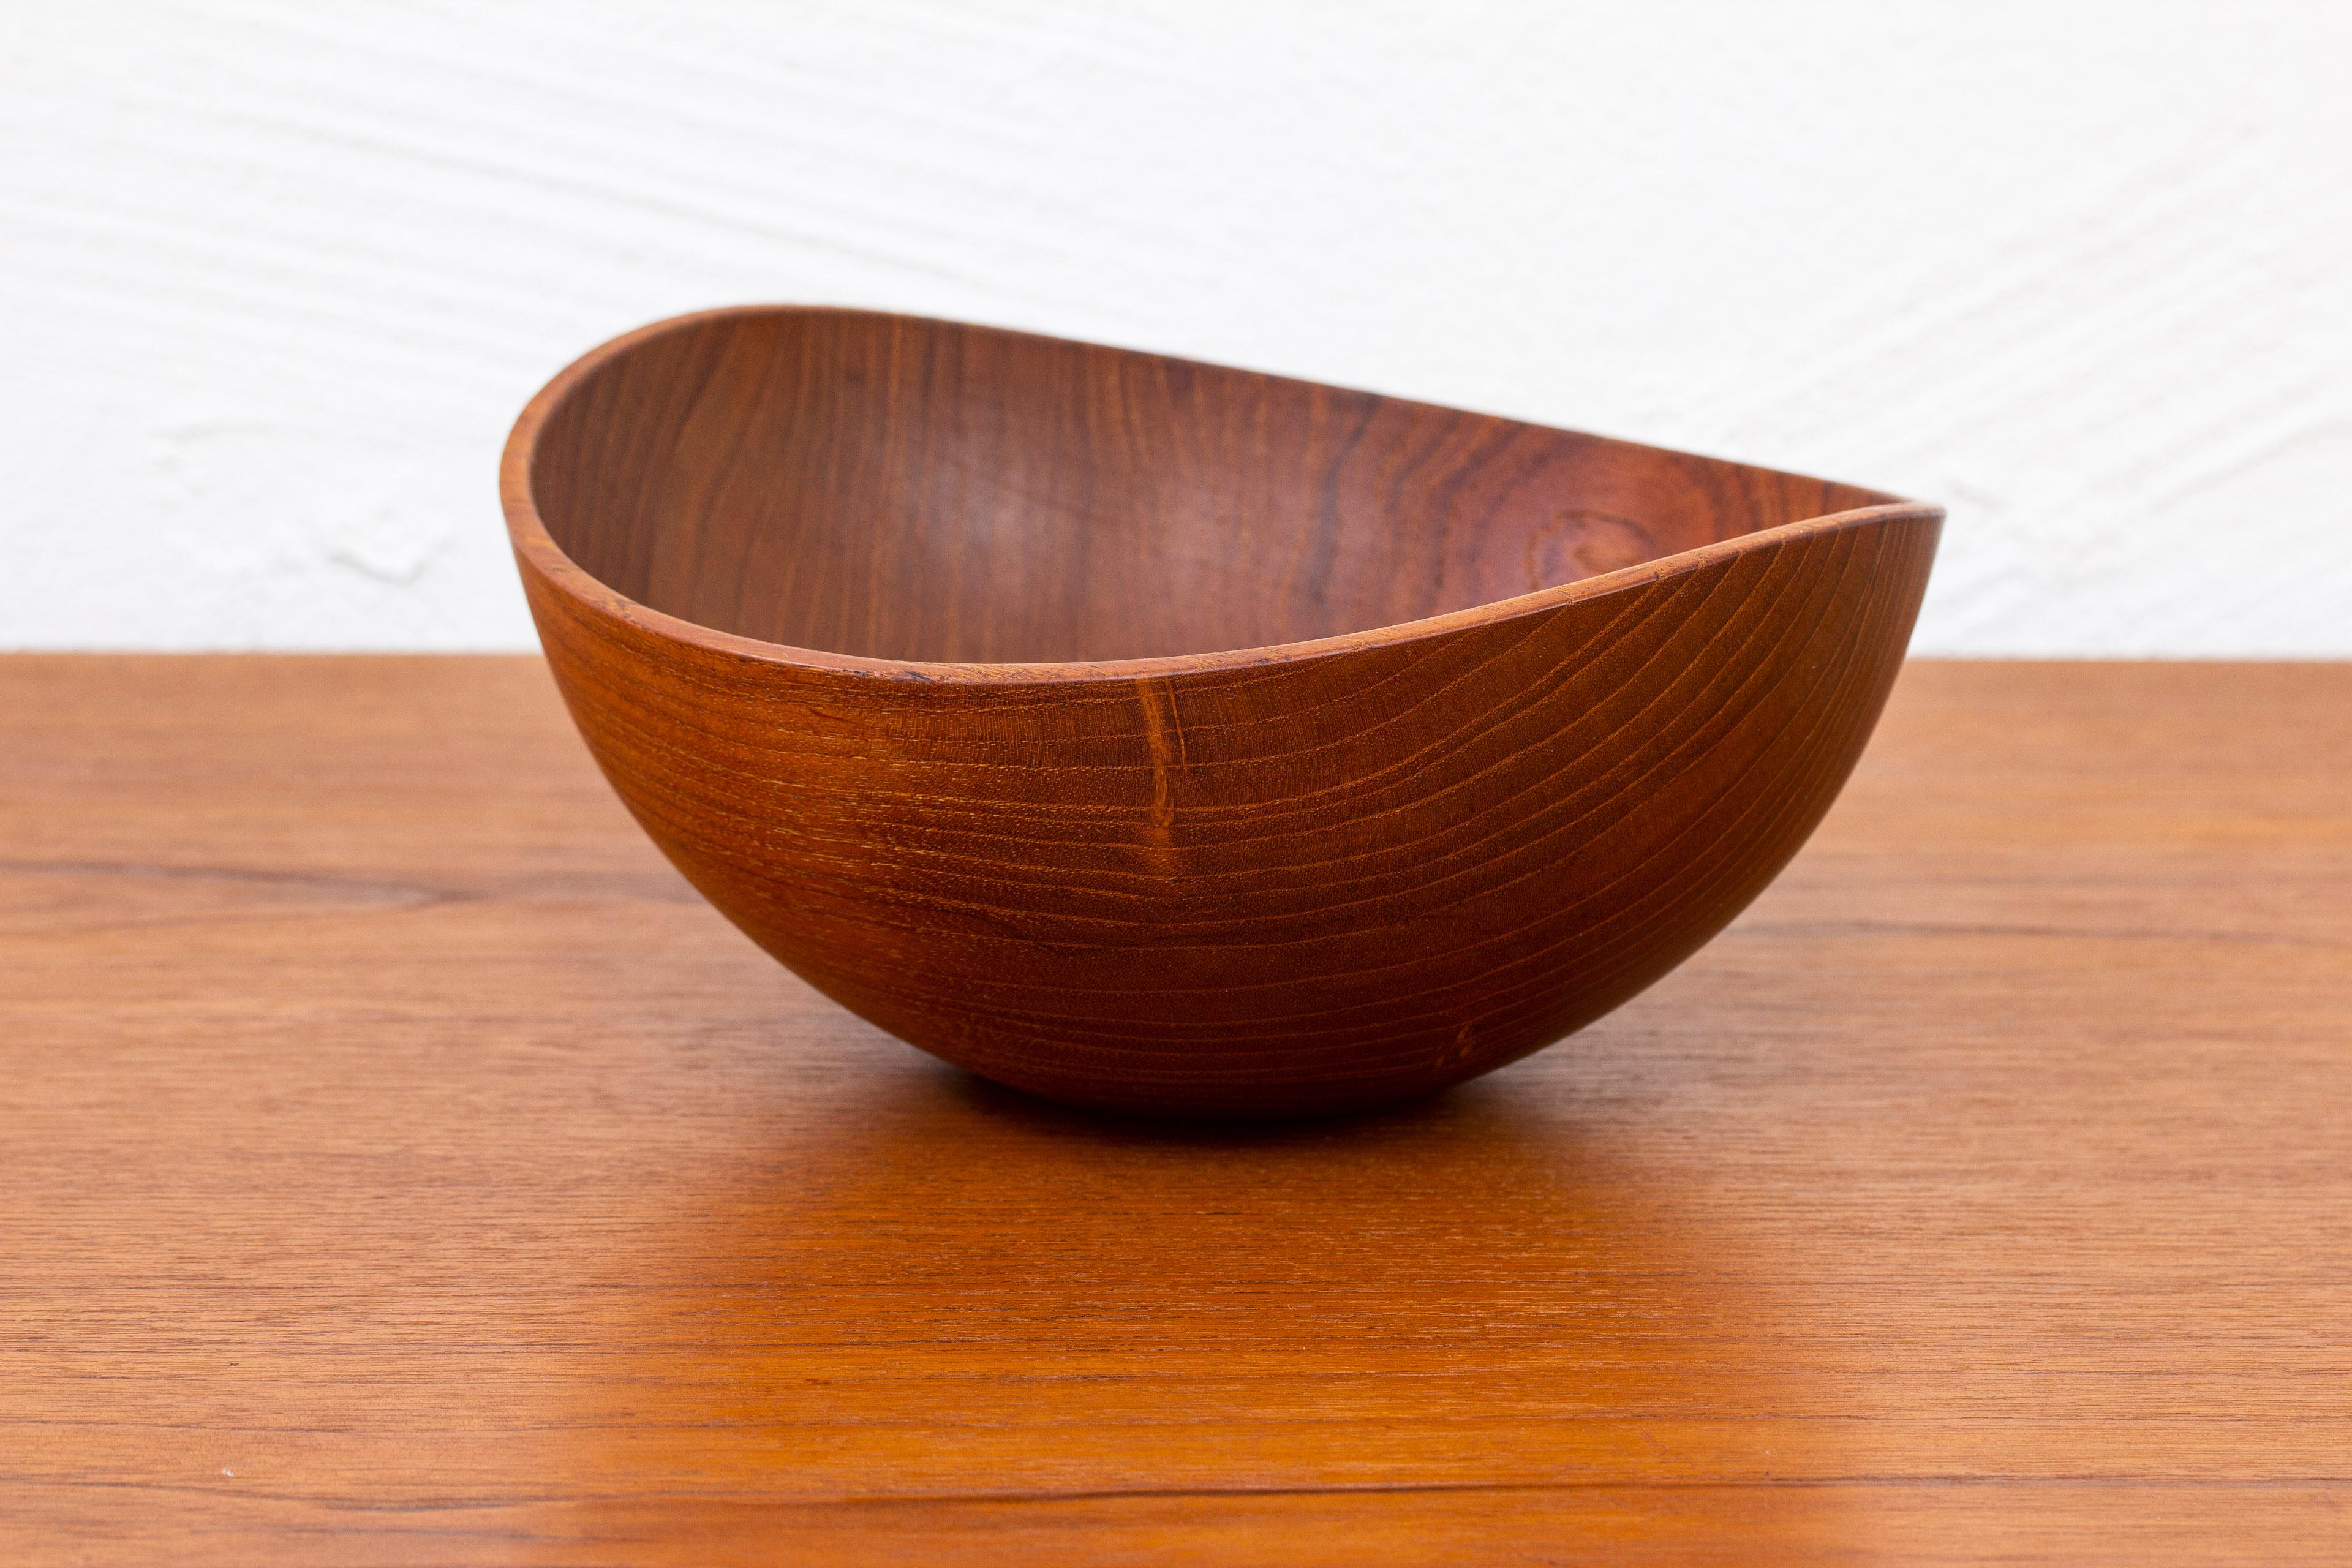 Swedish Organic Teak Bowl by Arvid Bergenblad, Hand Made in Sweden, 1950s